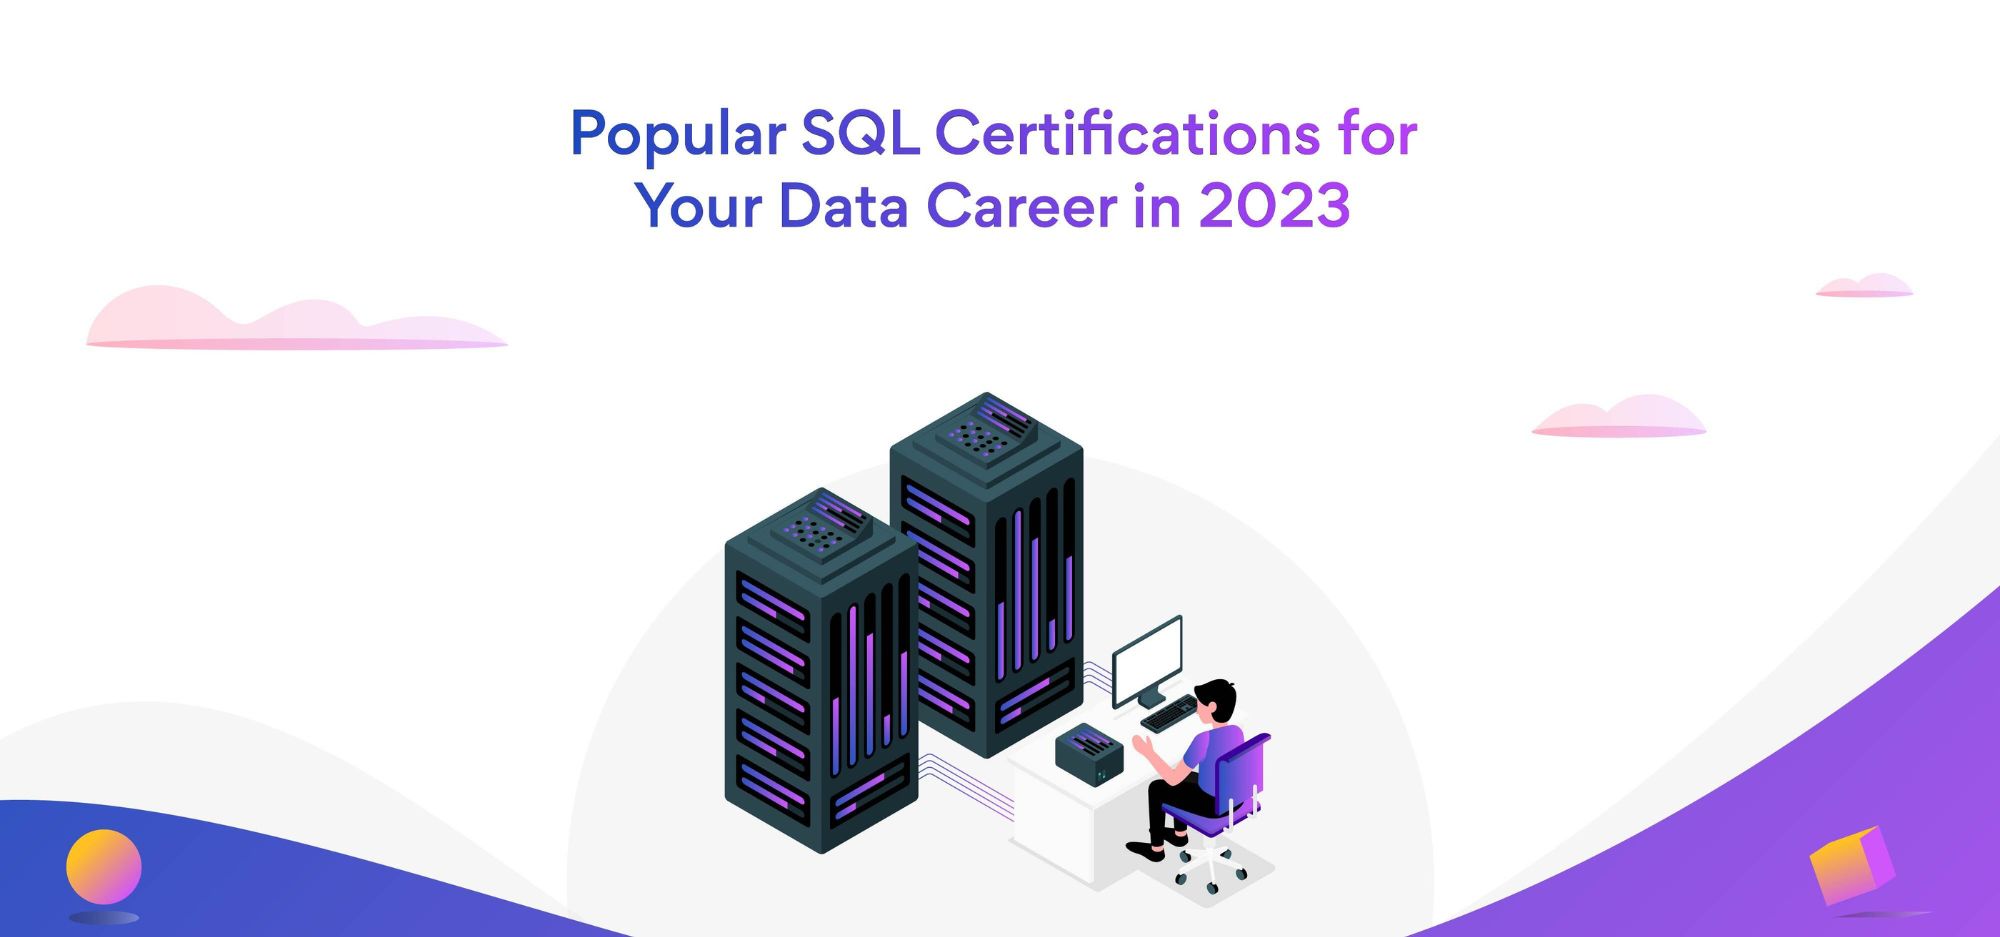 Popular SQL Certifications for Your Data Career in 2023